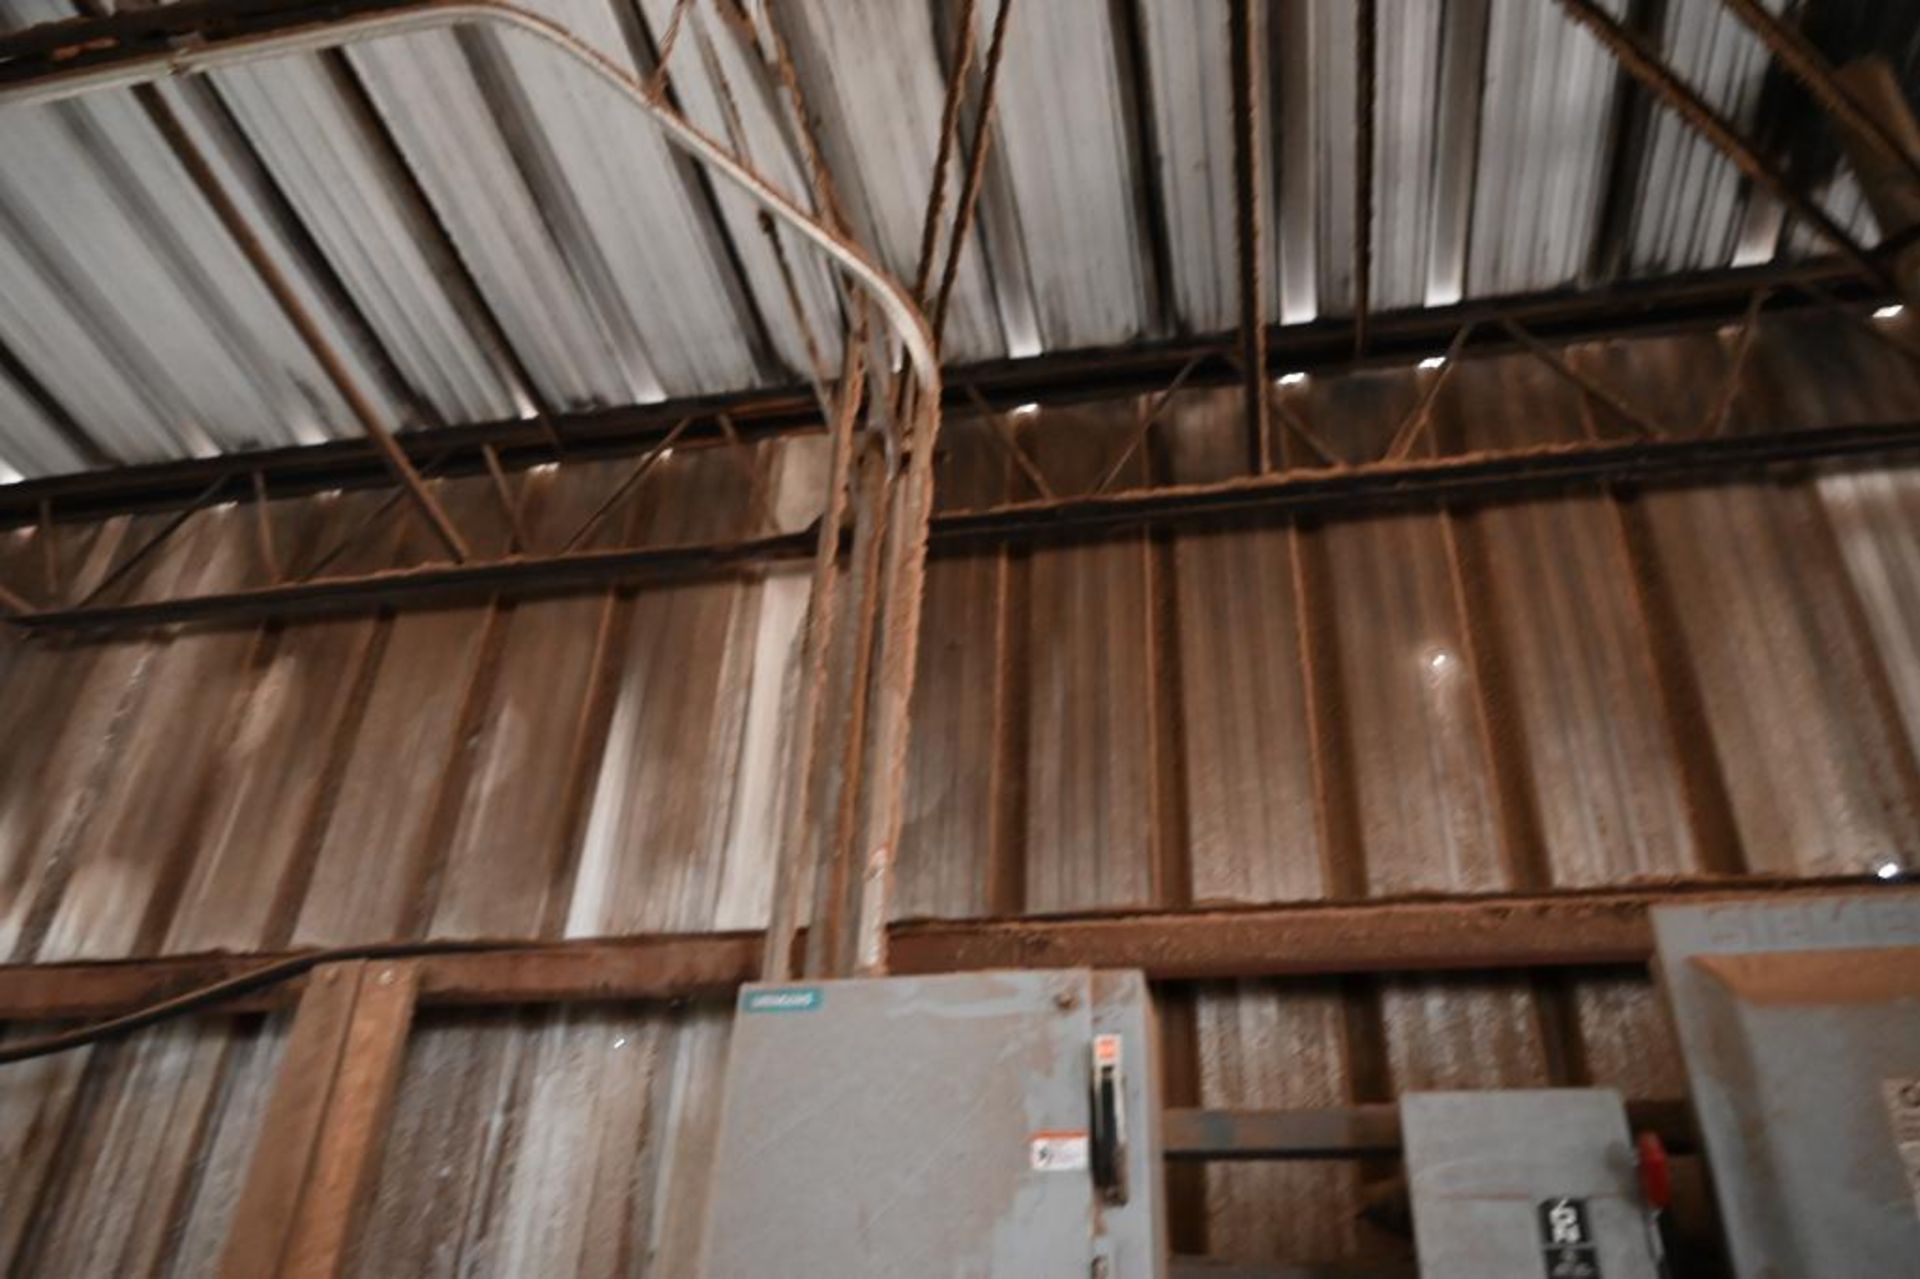 Electrical in Main Sawmill Building - Image 5 of 13